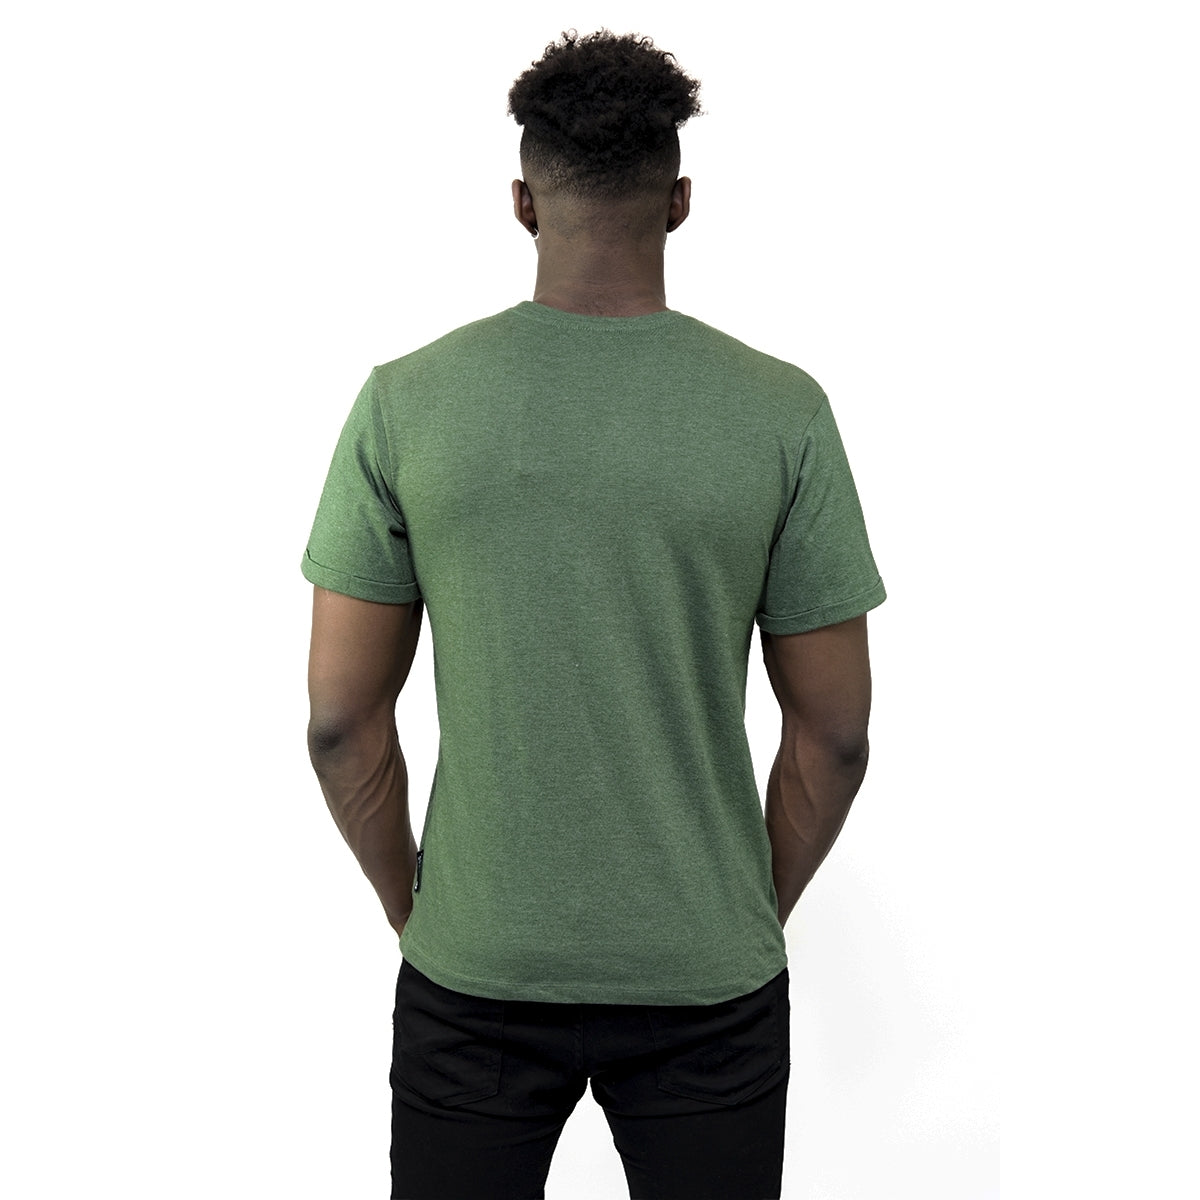 The back view of a man wearing a Guinness Green Vintage Heathered Harp T-Shirt by Guinness UK.